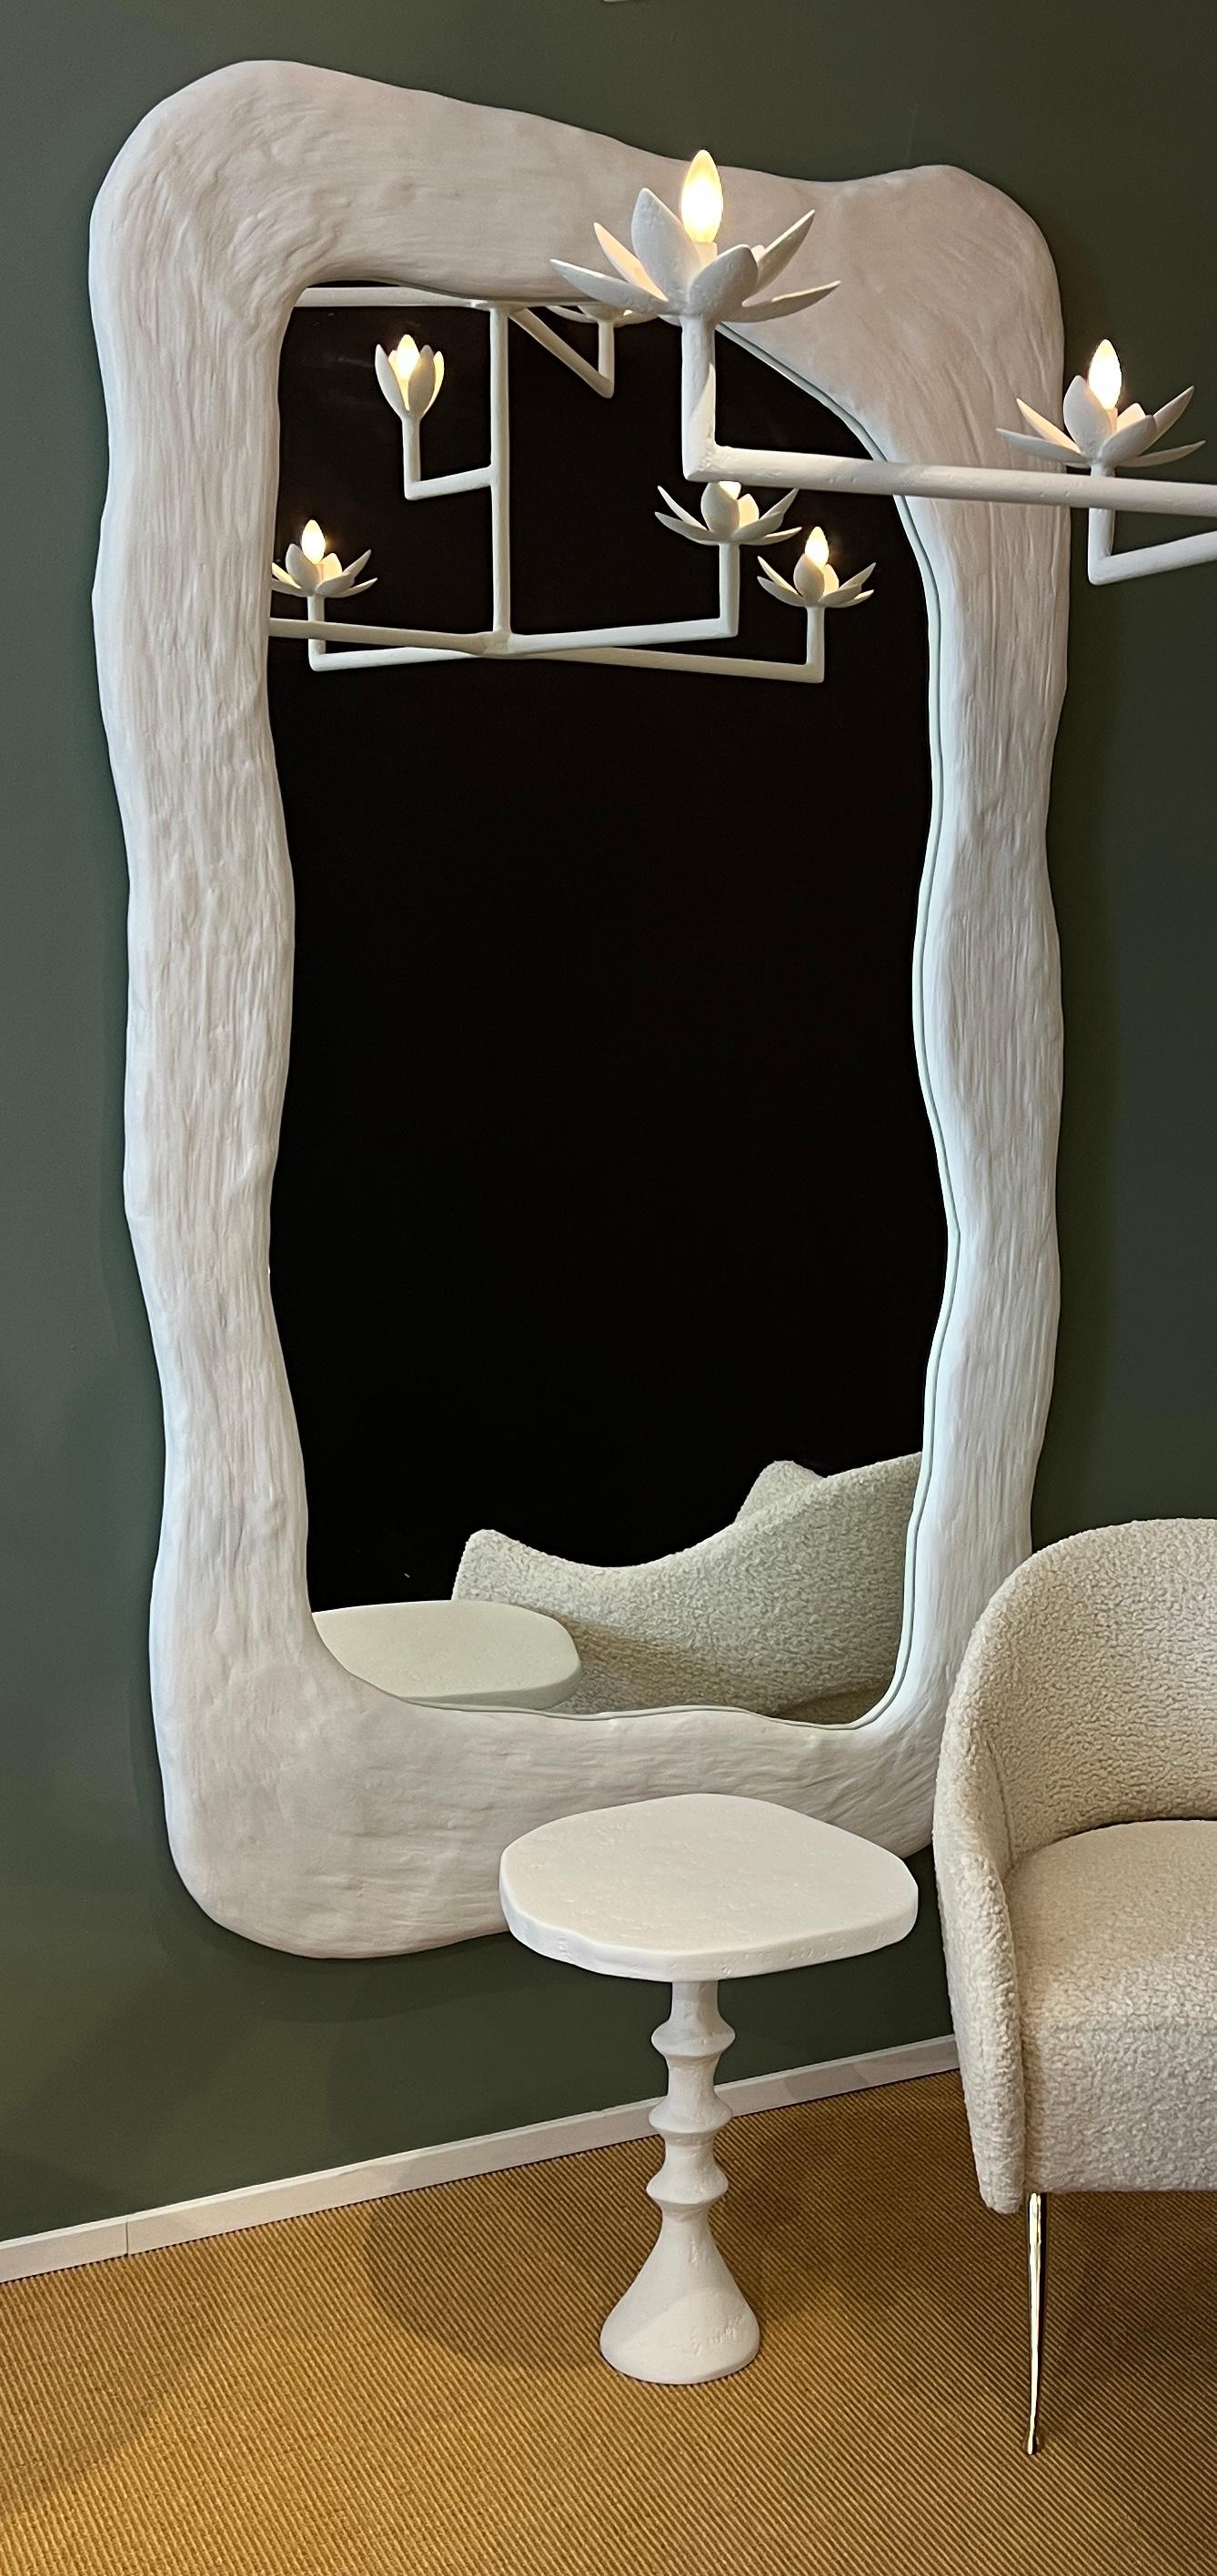 This bespoke over size mirror is created by Bourgeois Boheme Atelier. This magnificent sculptural large scale mirror has an organic shape and texture. It is a real piece of art . Can be mounted horizontally or vertically . Interior mirror